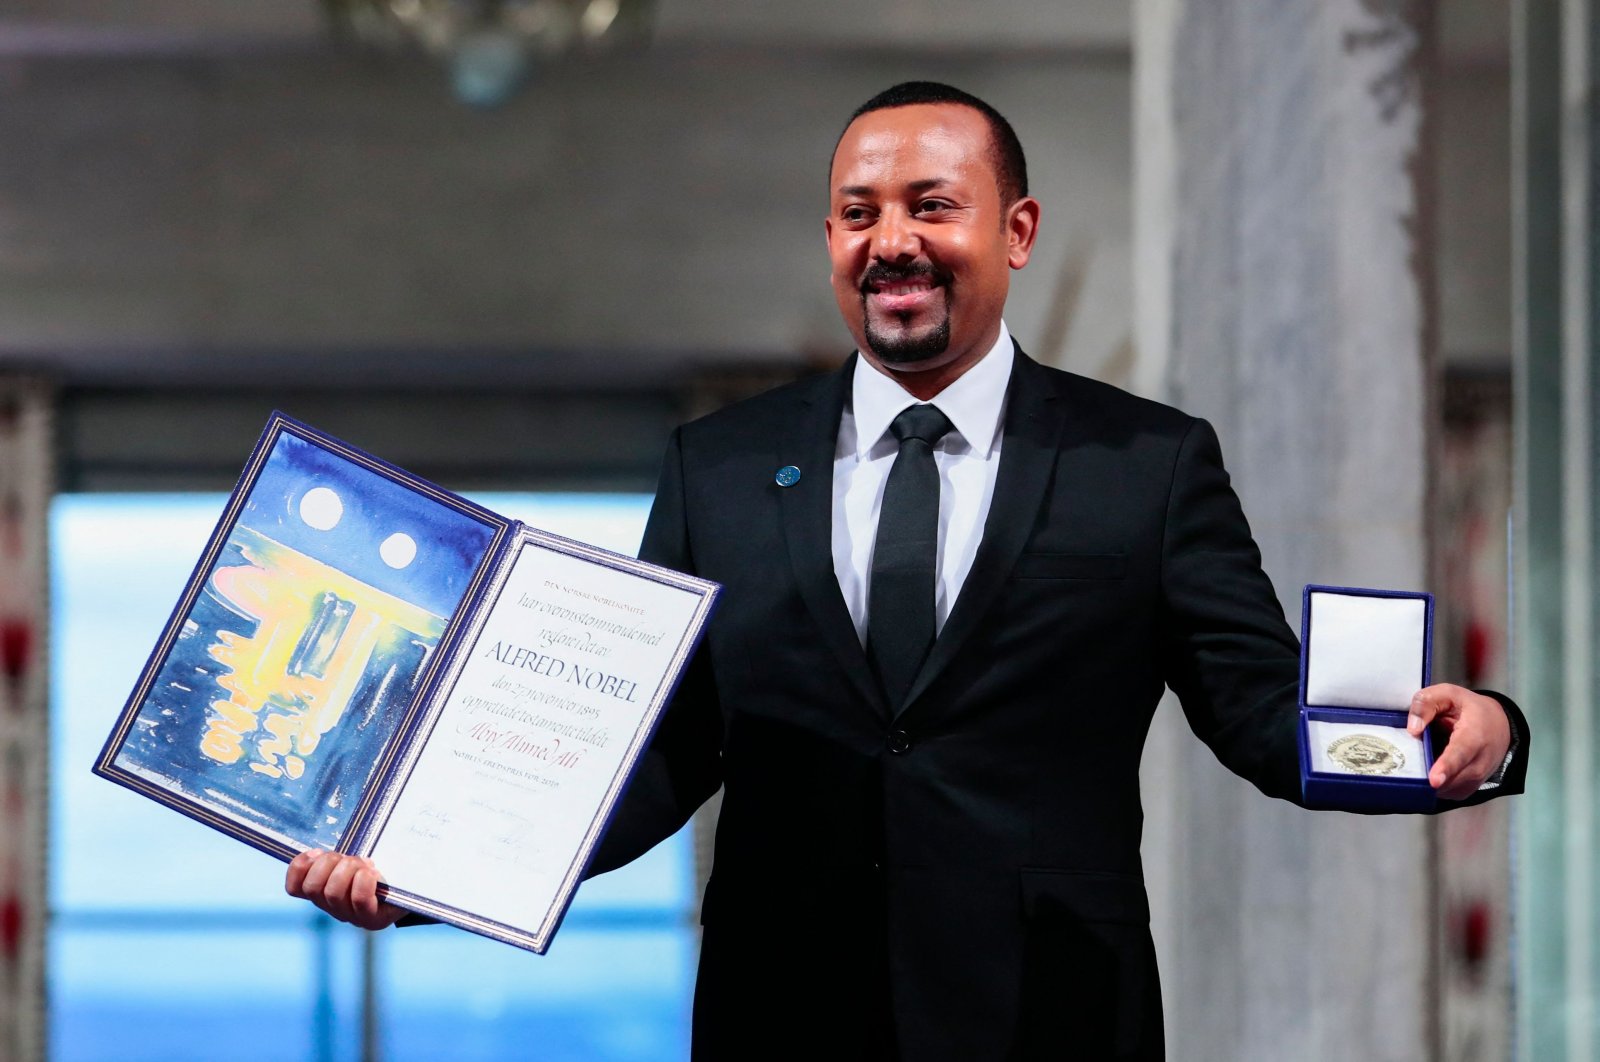 Ethiopia&#039;s Prime Minister and Nobel Peace Prize Laureate Abiy Ahmed Ali poses after he was awarded the Nobel Peace Prize during a ceremony at the city hall in Oslo, Norway, Dec. 10, 2019. (AFP Photo)